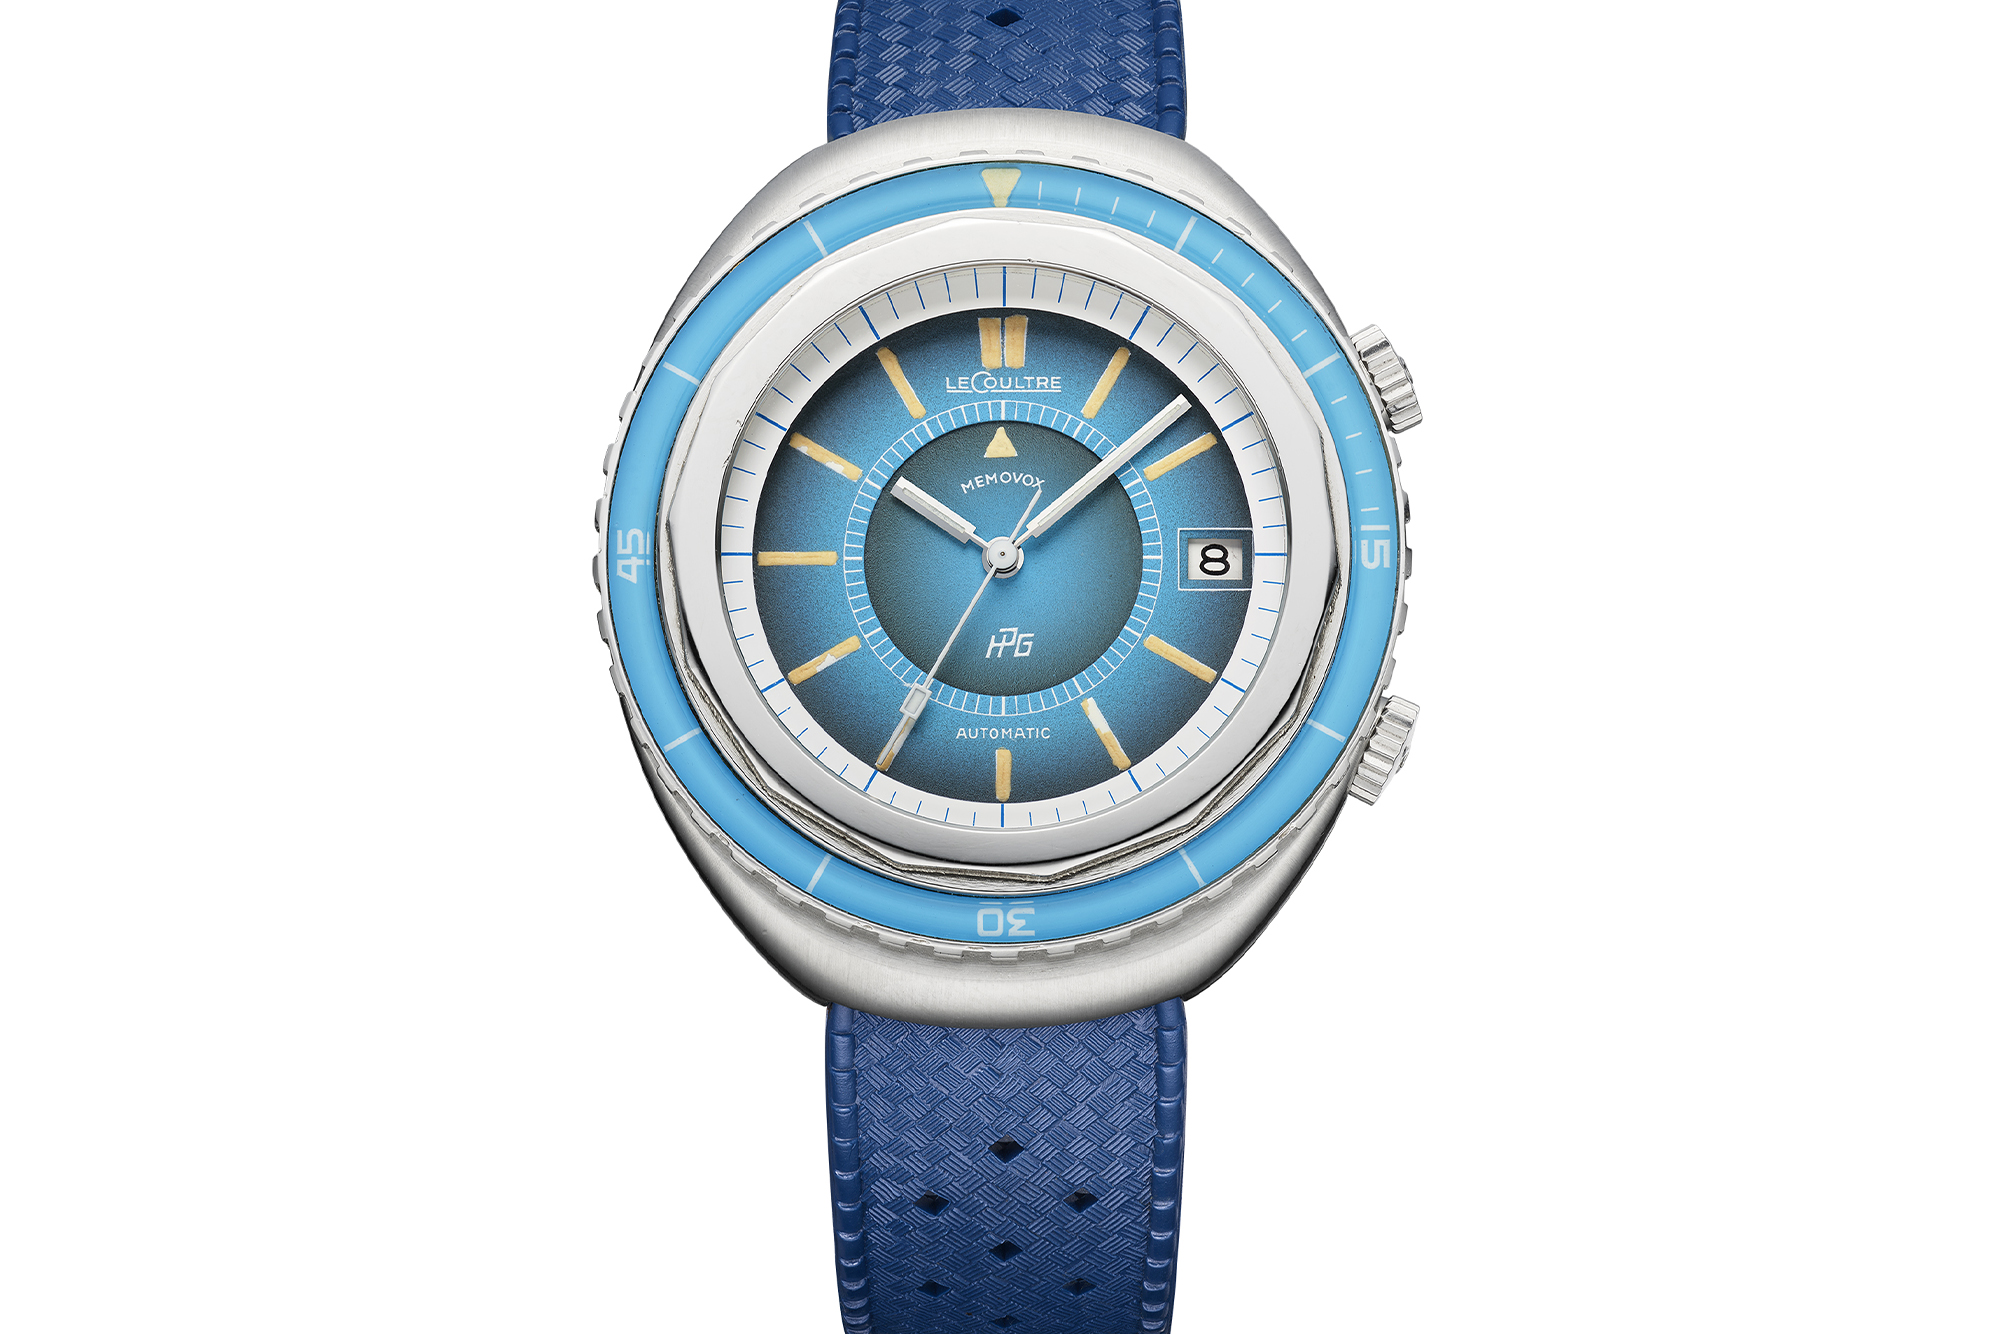 Jaeger-LeCoultre watch on white background